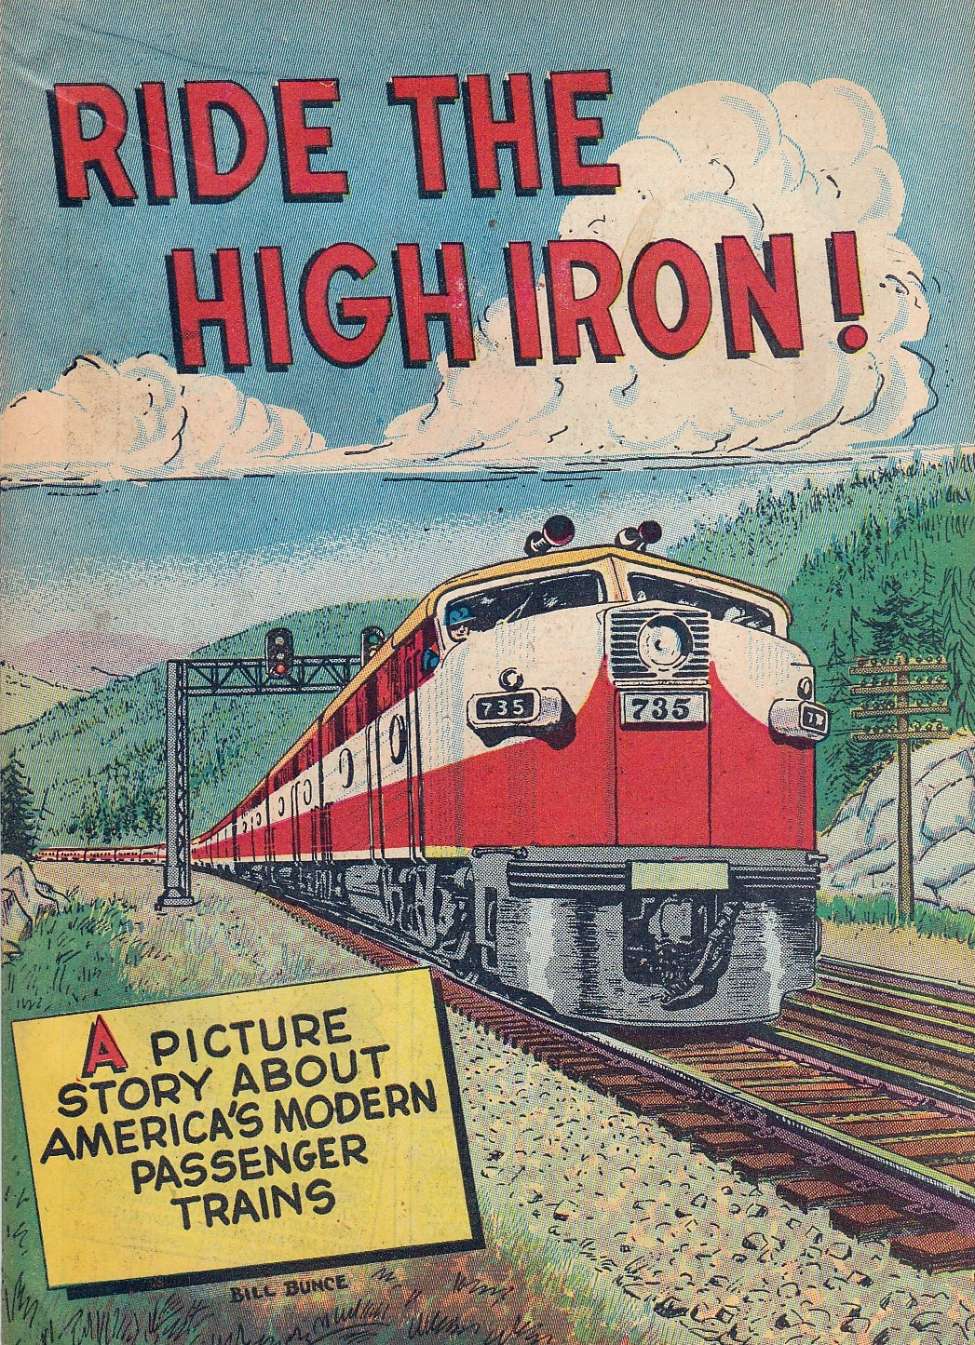 Book Cover For Ride The High Iron!